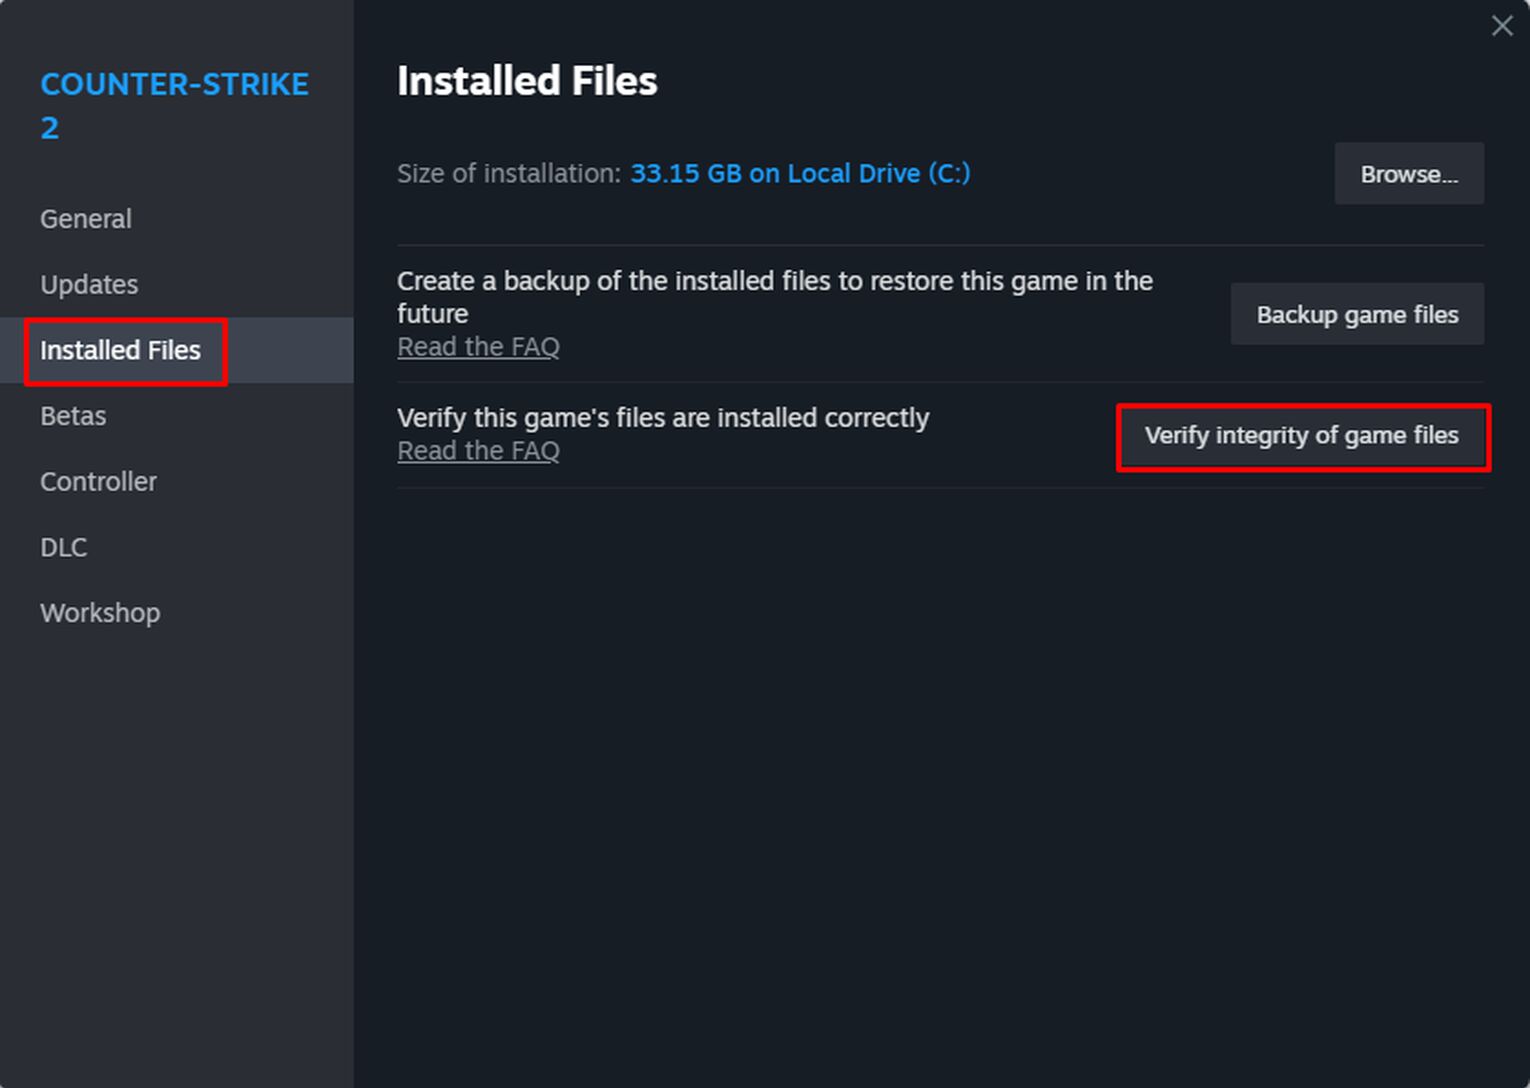 Verifying the integrity of your game files